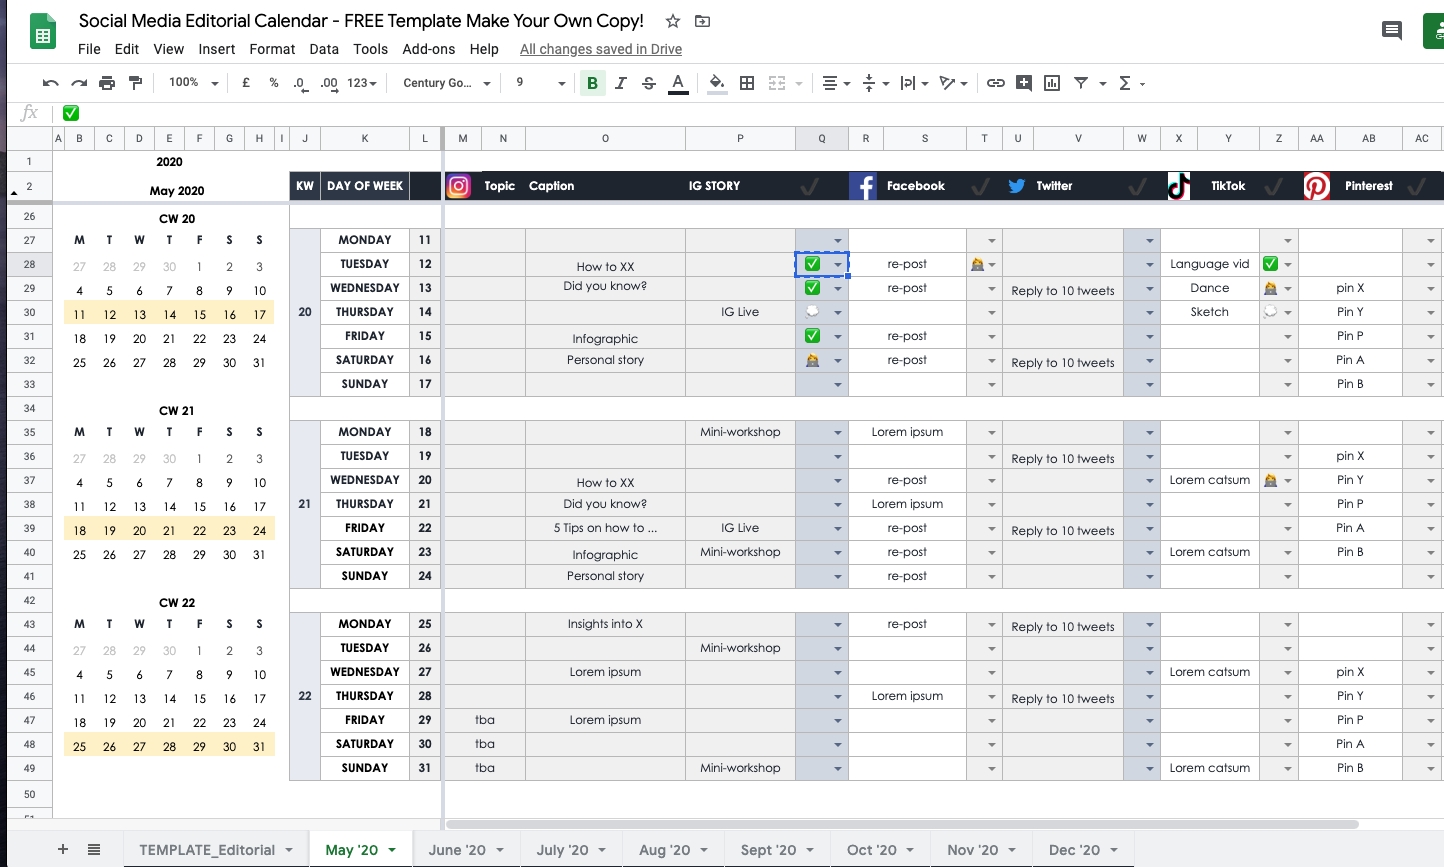 How To Plan Your Social Media In 2020 As An Individual Or Editorial Calendar Template Google Sheets